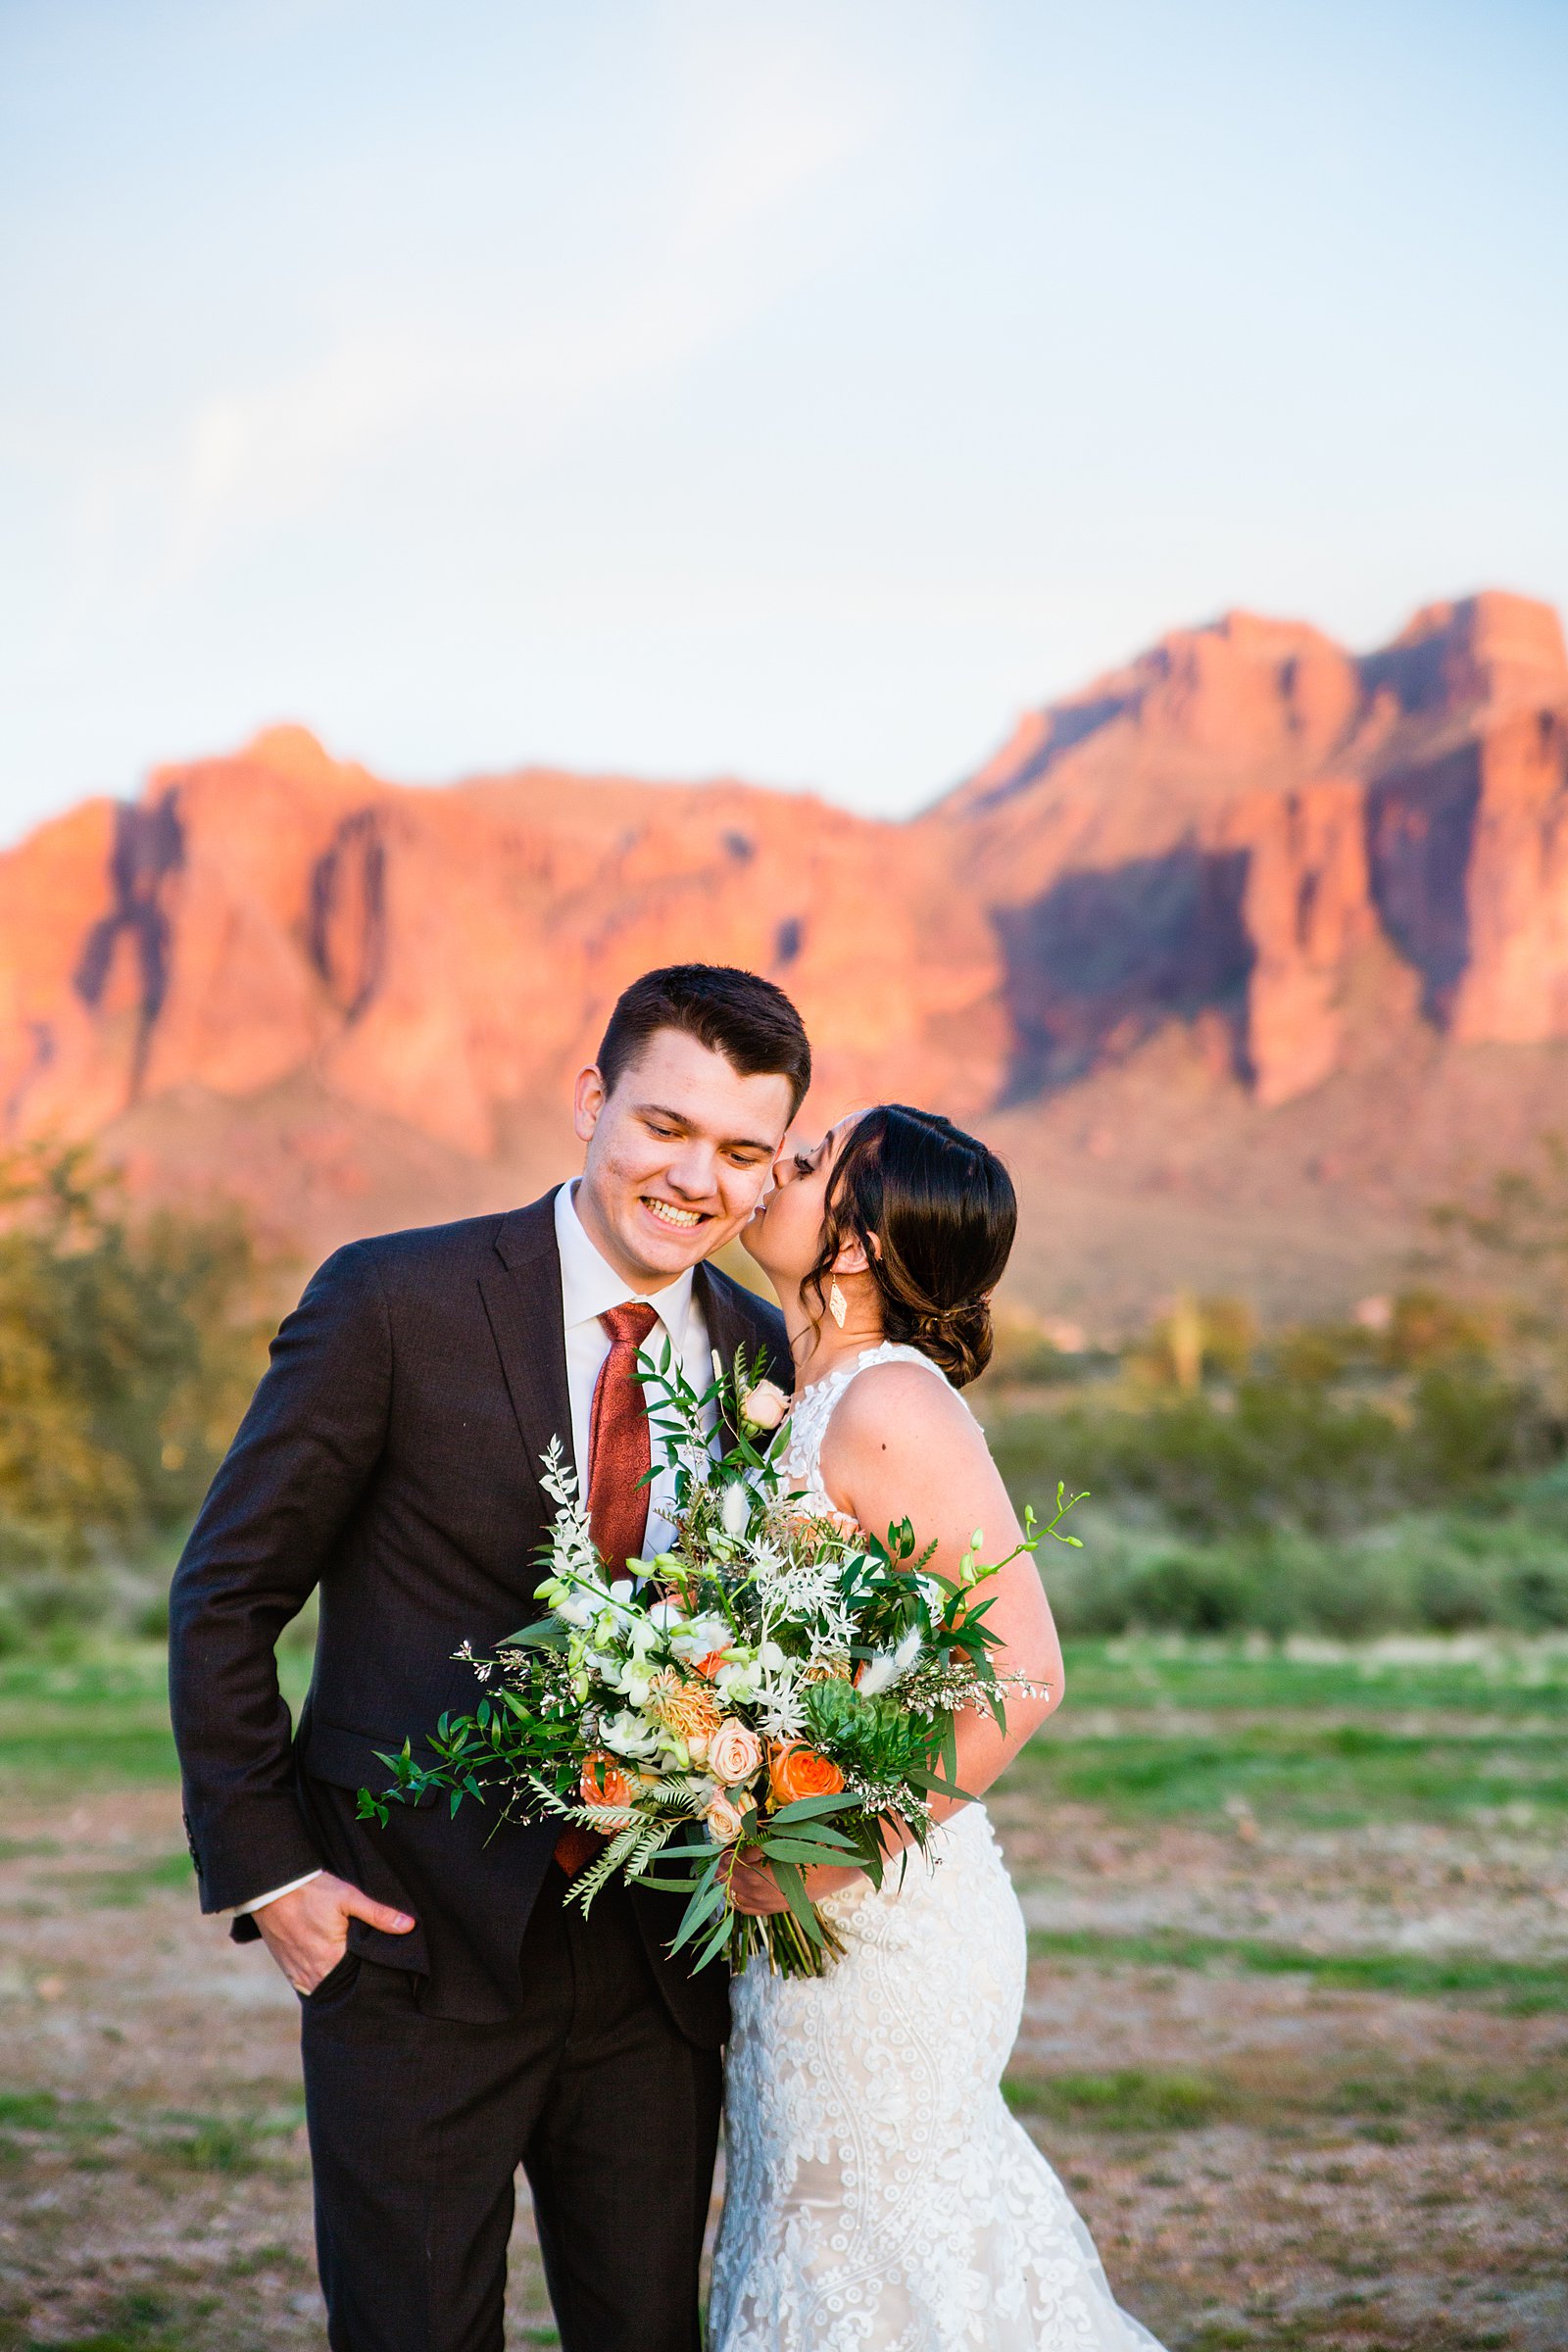 Bride and Groom laughing together during their The Paseo wedding by Apache Junction wedding photographer PMA Photography.